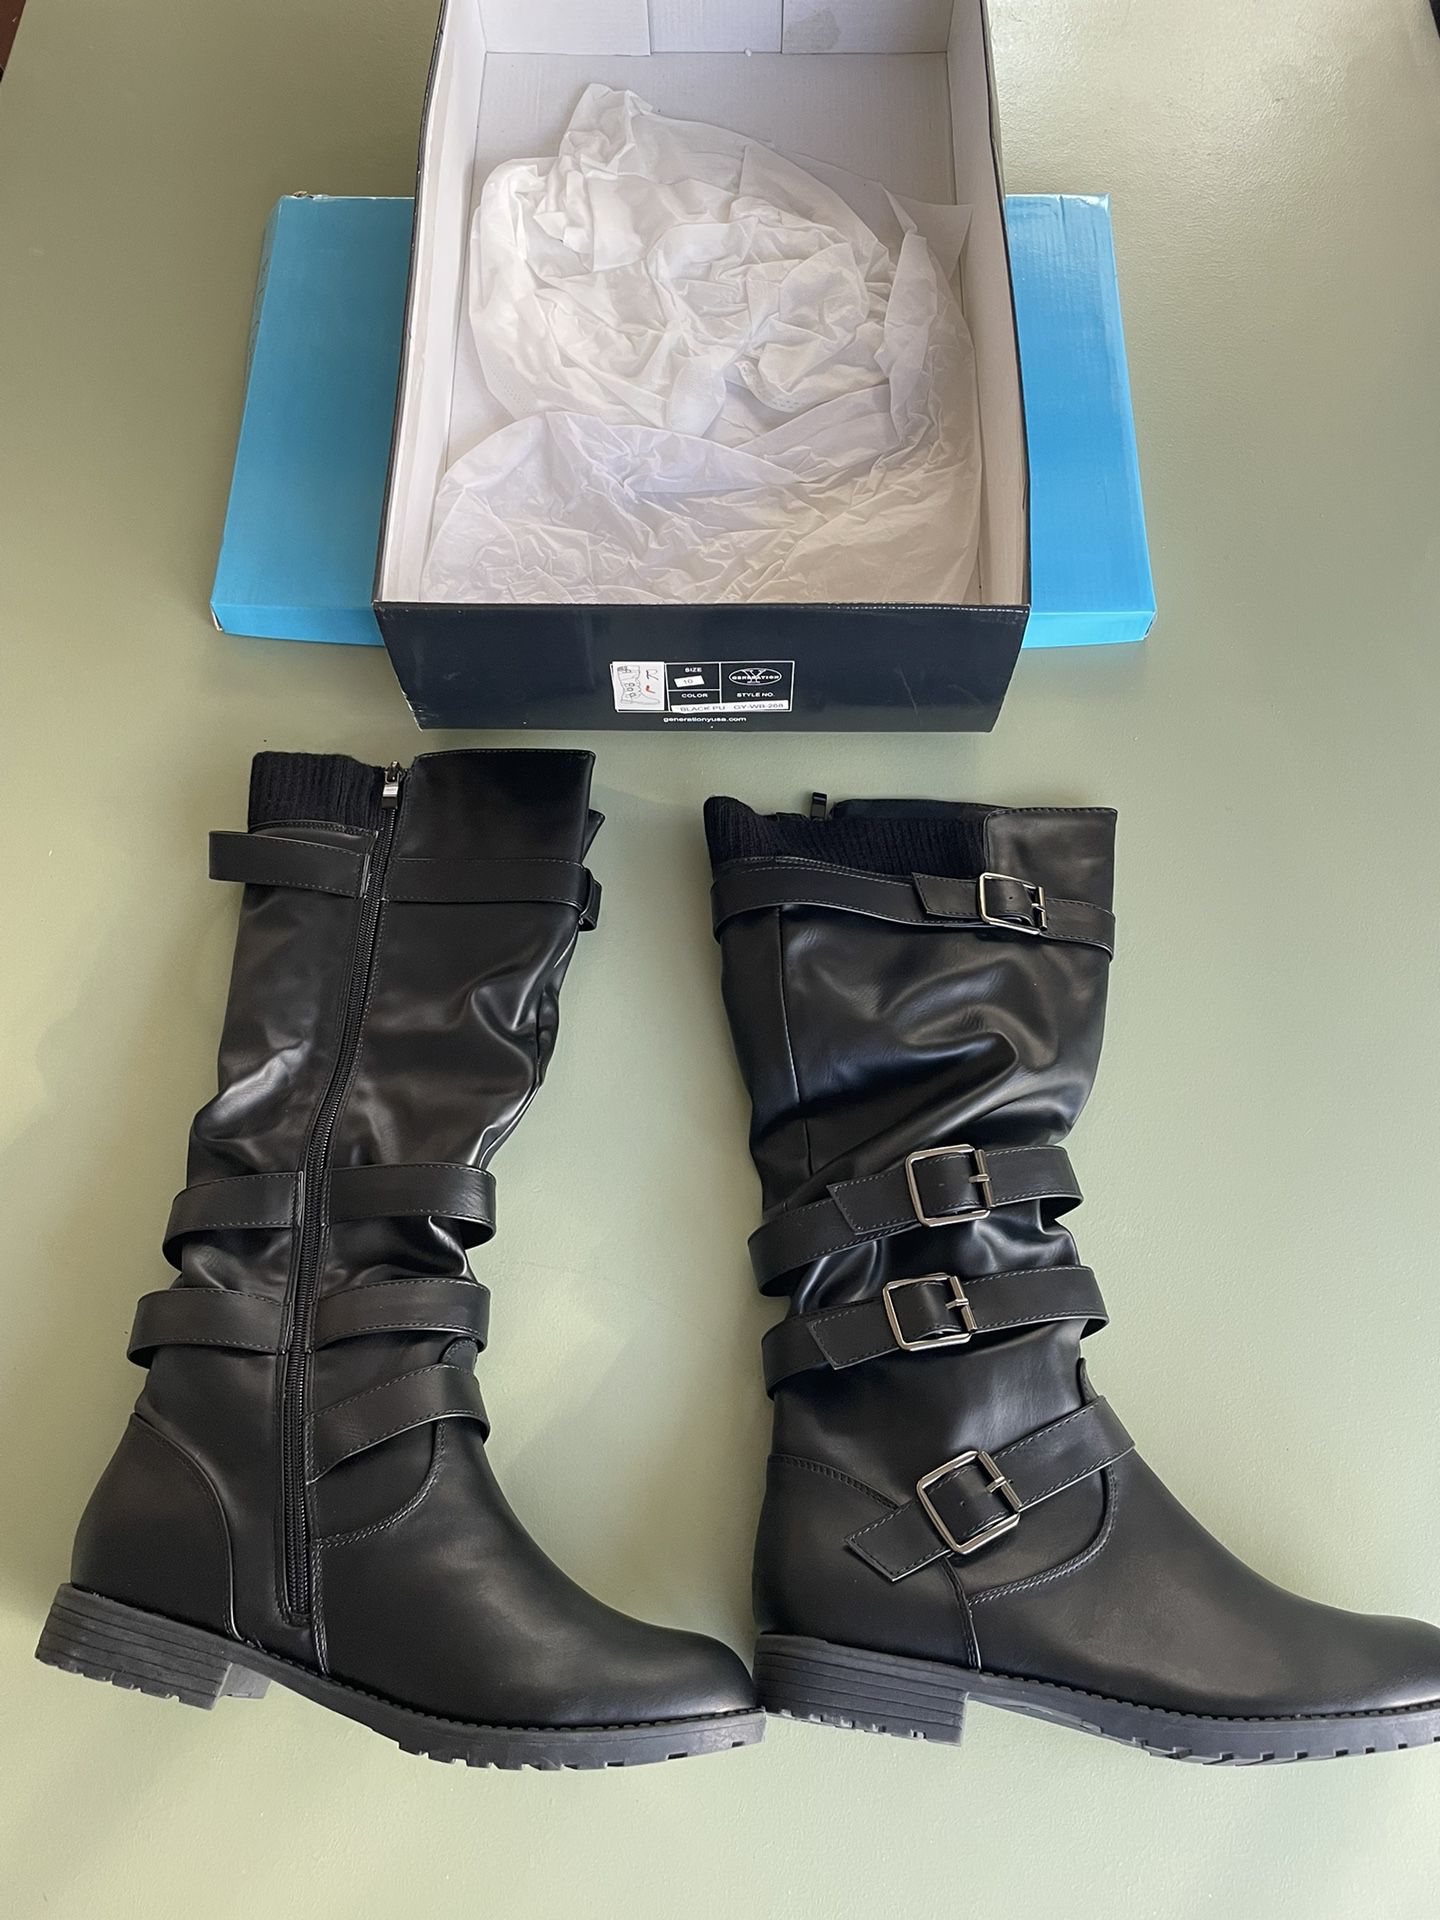 BLACK BOOTS - NEW IN BOX - SIZE 10